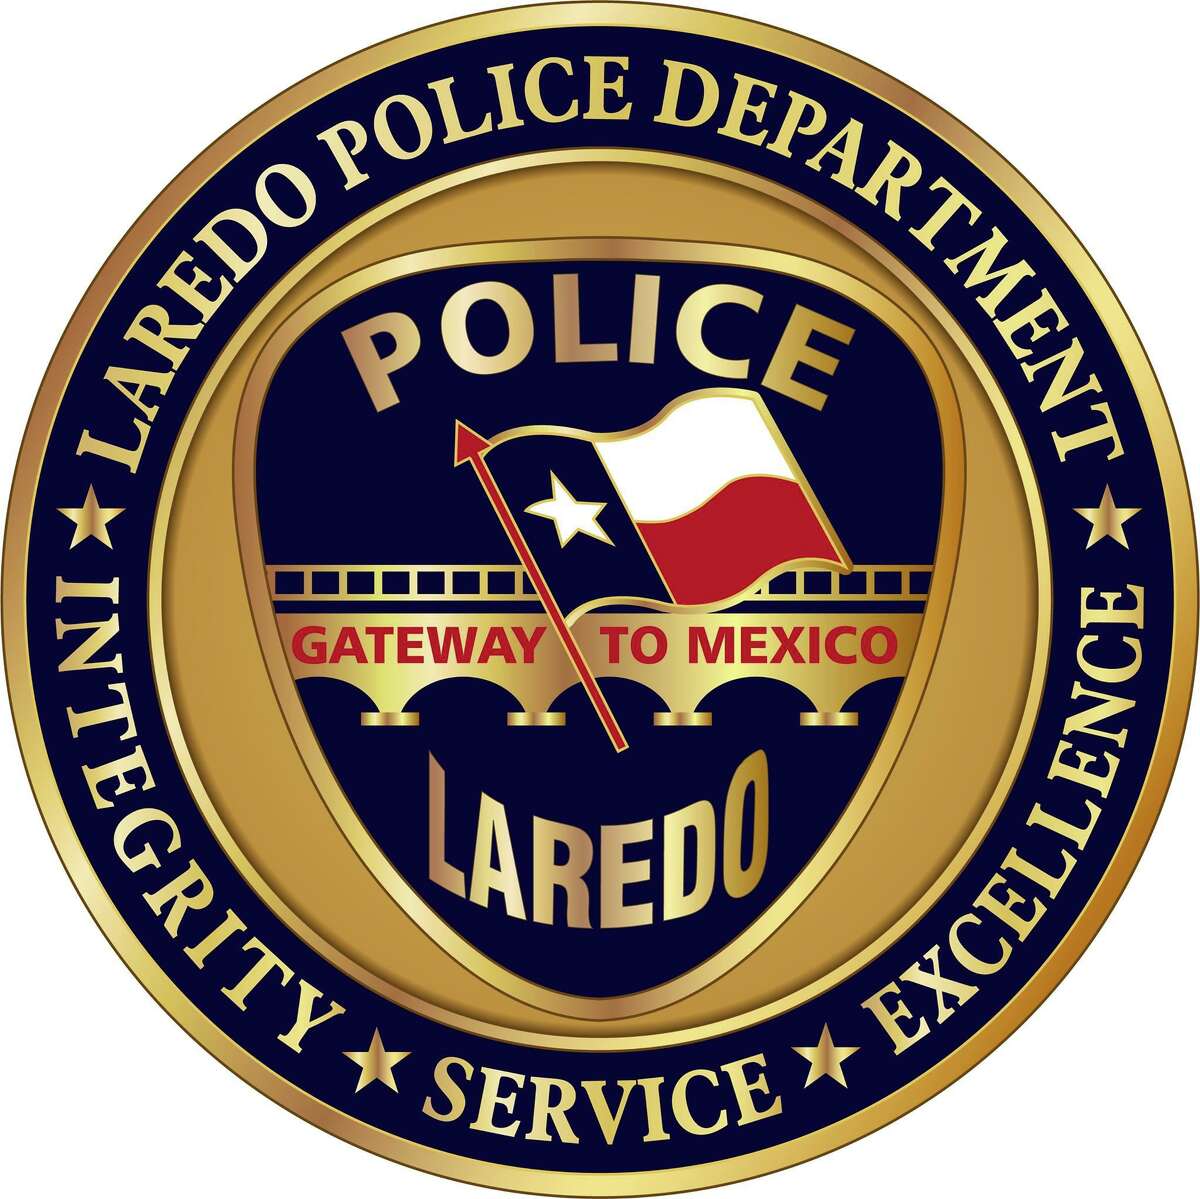 The Laredo Police Department detained an armed 40-year-old male who barricaded himself in his home on Saturday.